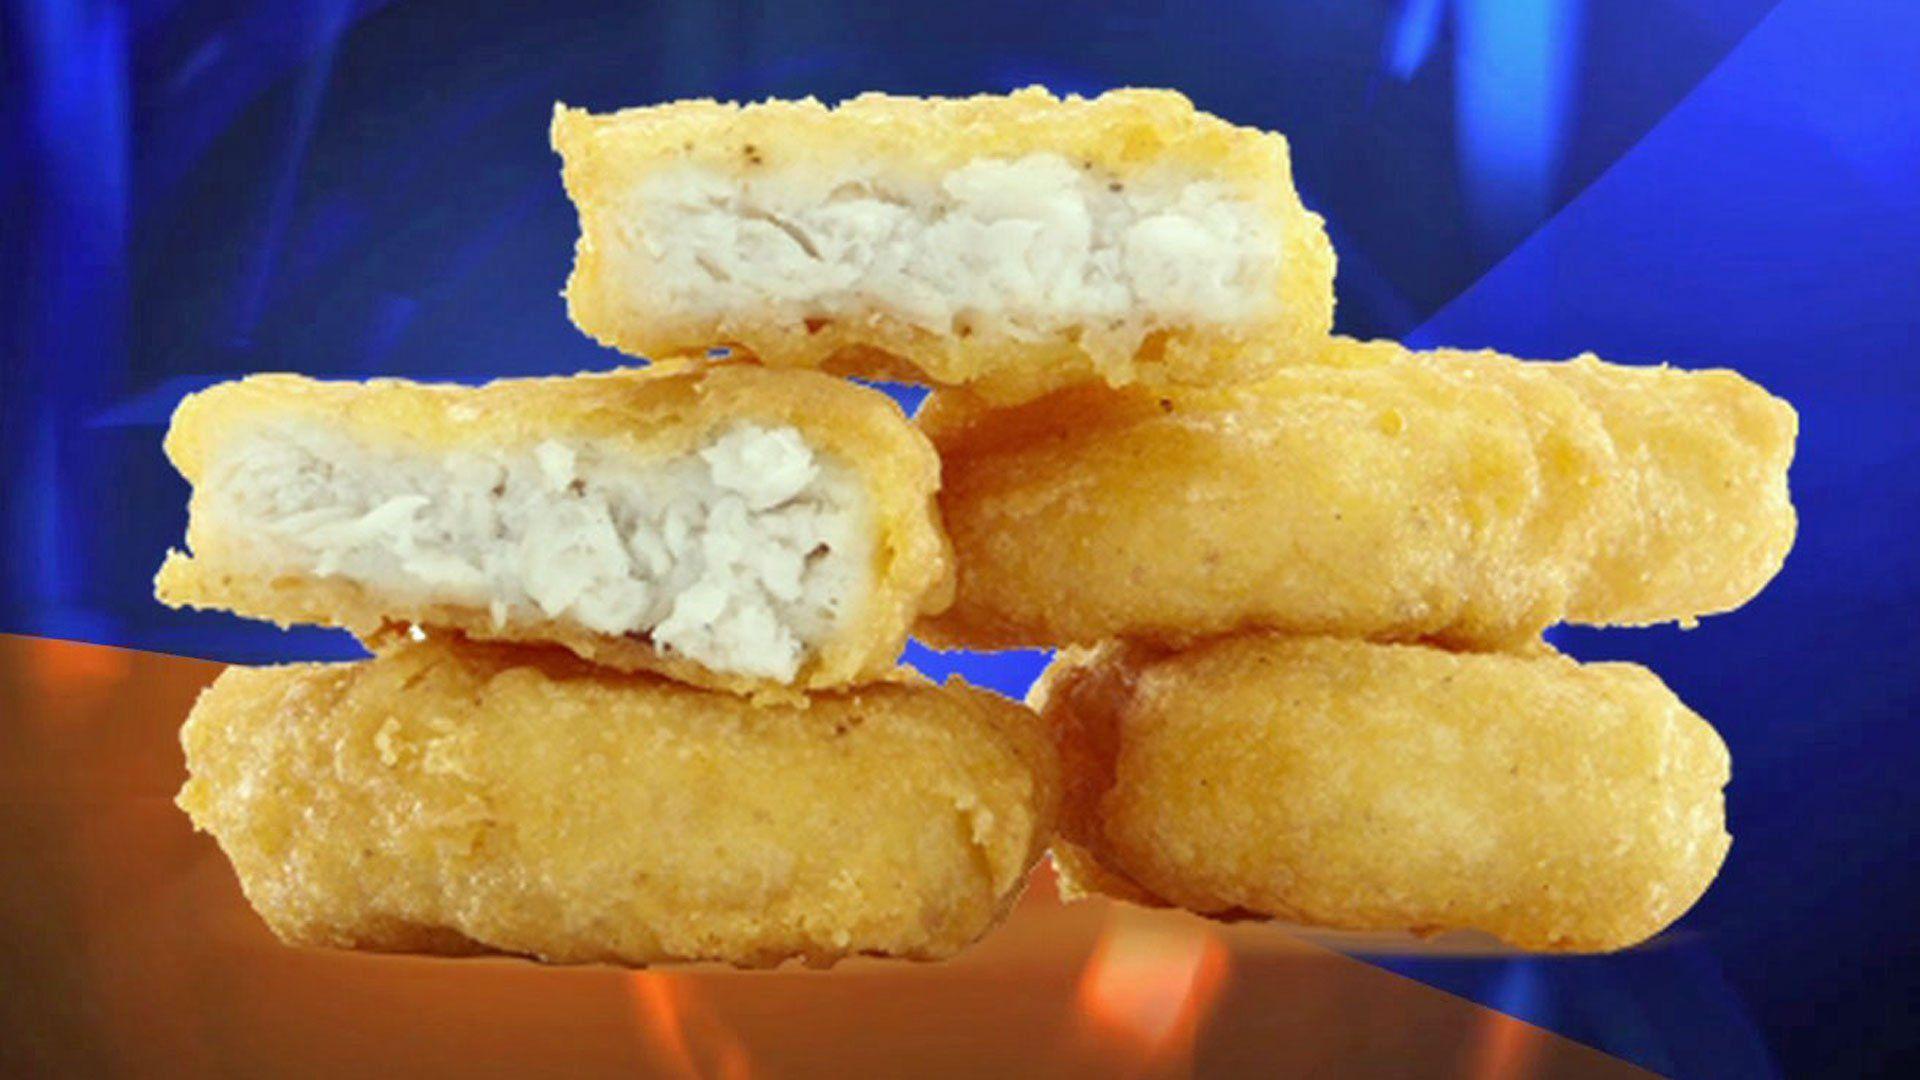 Study Says Chicken Nuggets Contain Little Meat